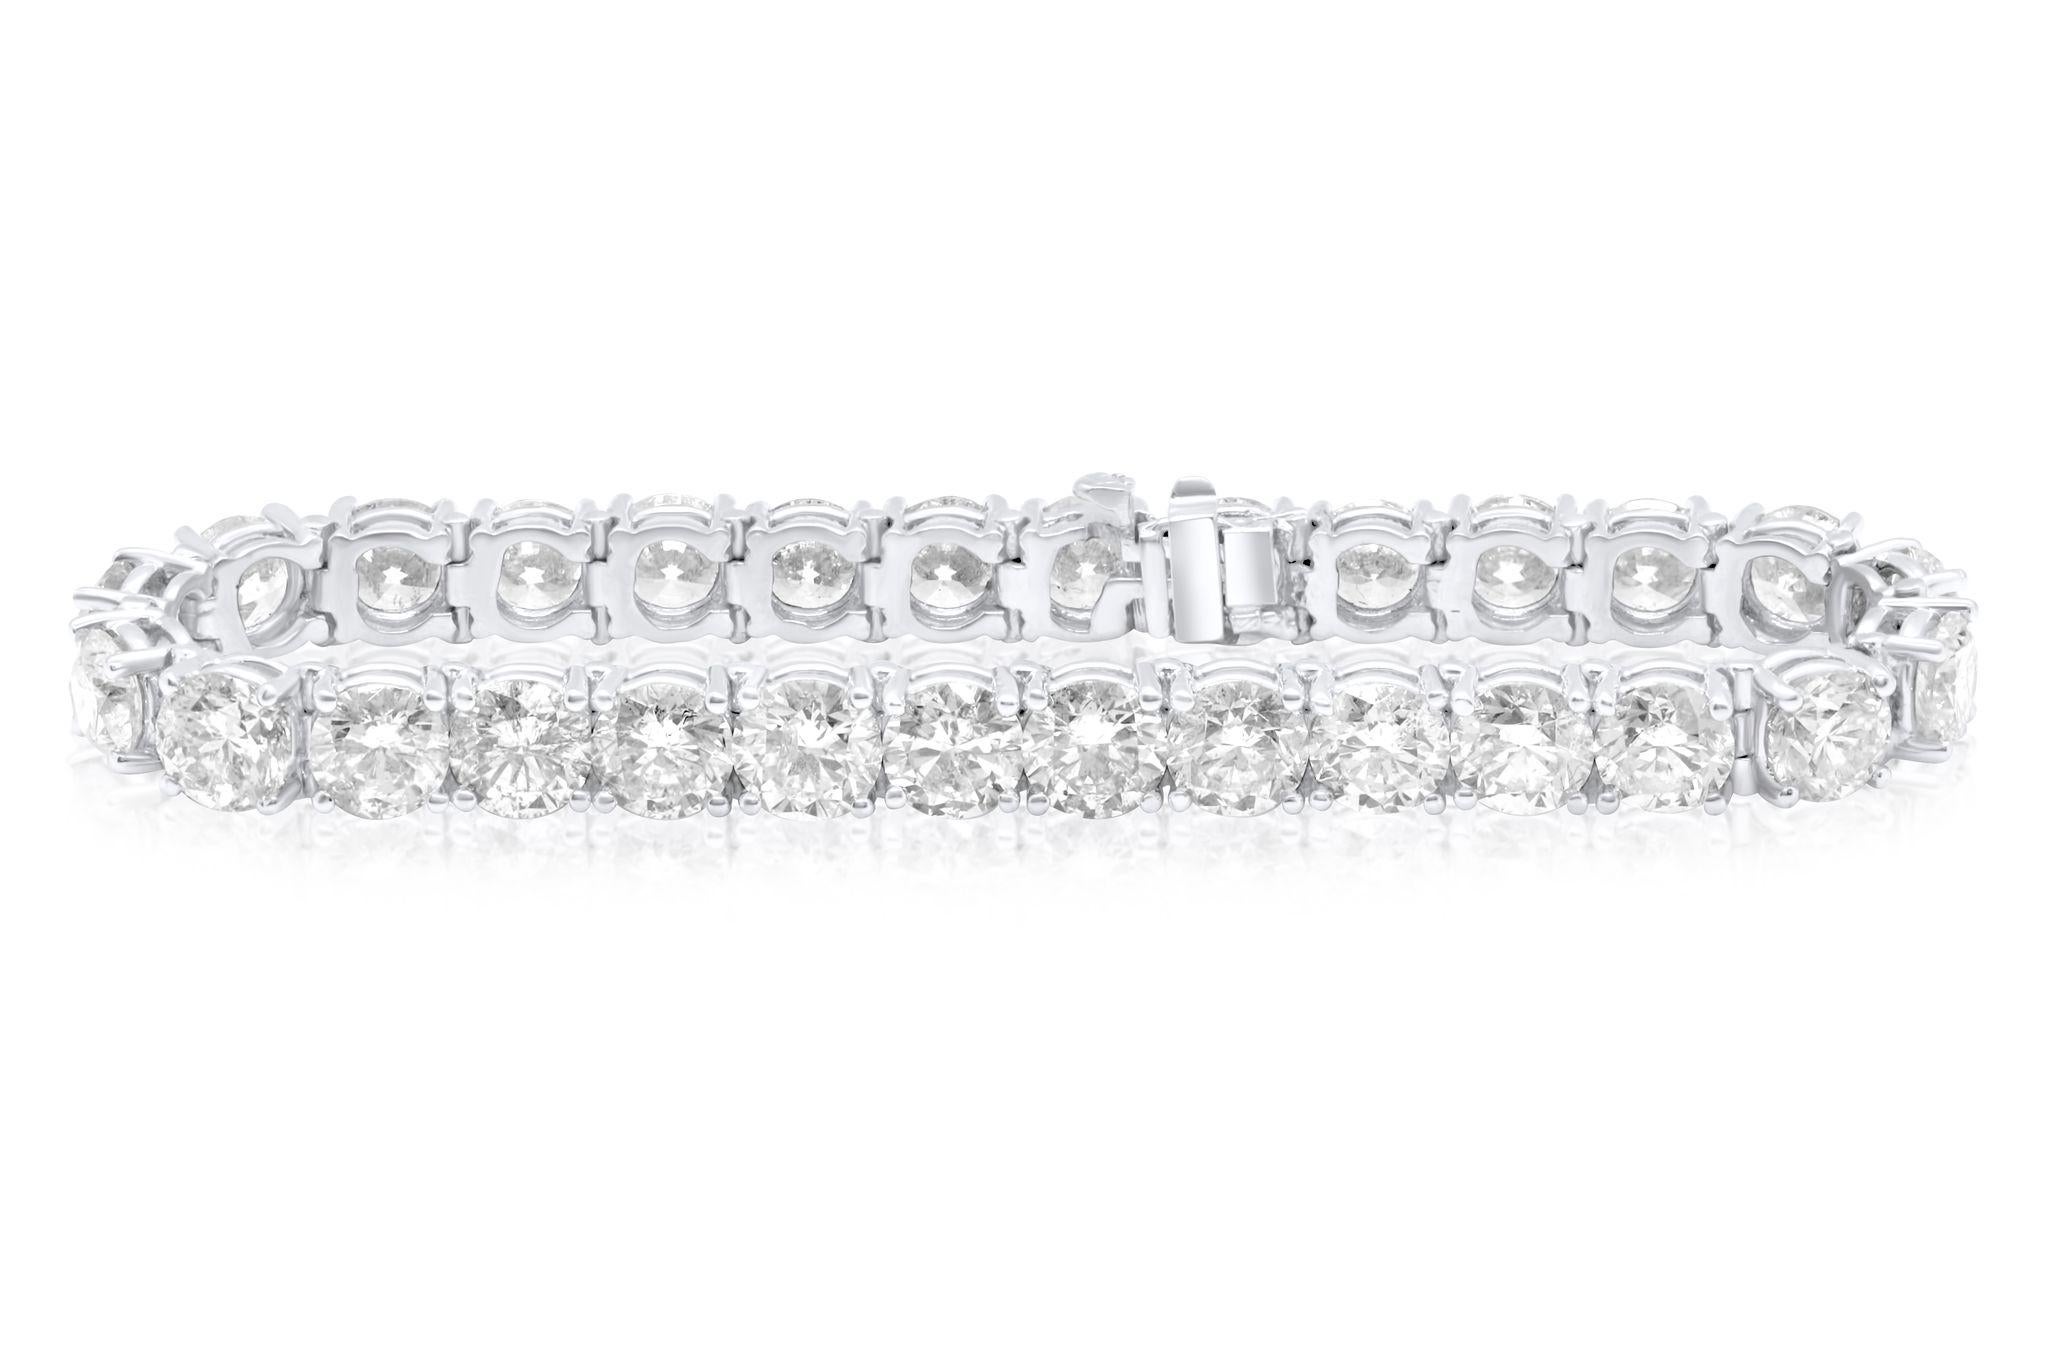 18 kt WG classic tennis Bracelet 14.65 cts diamonds 4 ptong 36 st
Diana M. is a leading supplier of top-quality fine jewelry for over 35 years.
Diana M is one-stop shop for all your jewelry shopping, carrying line of diamond rings, earrings,